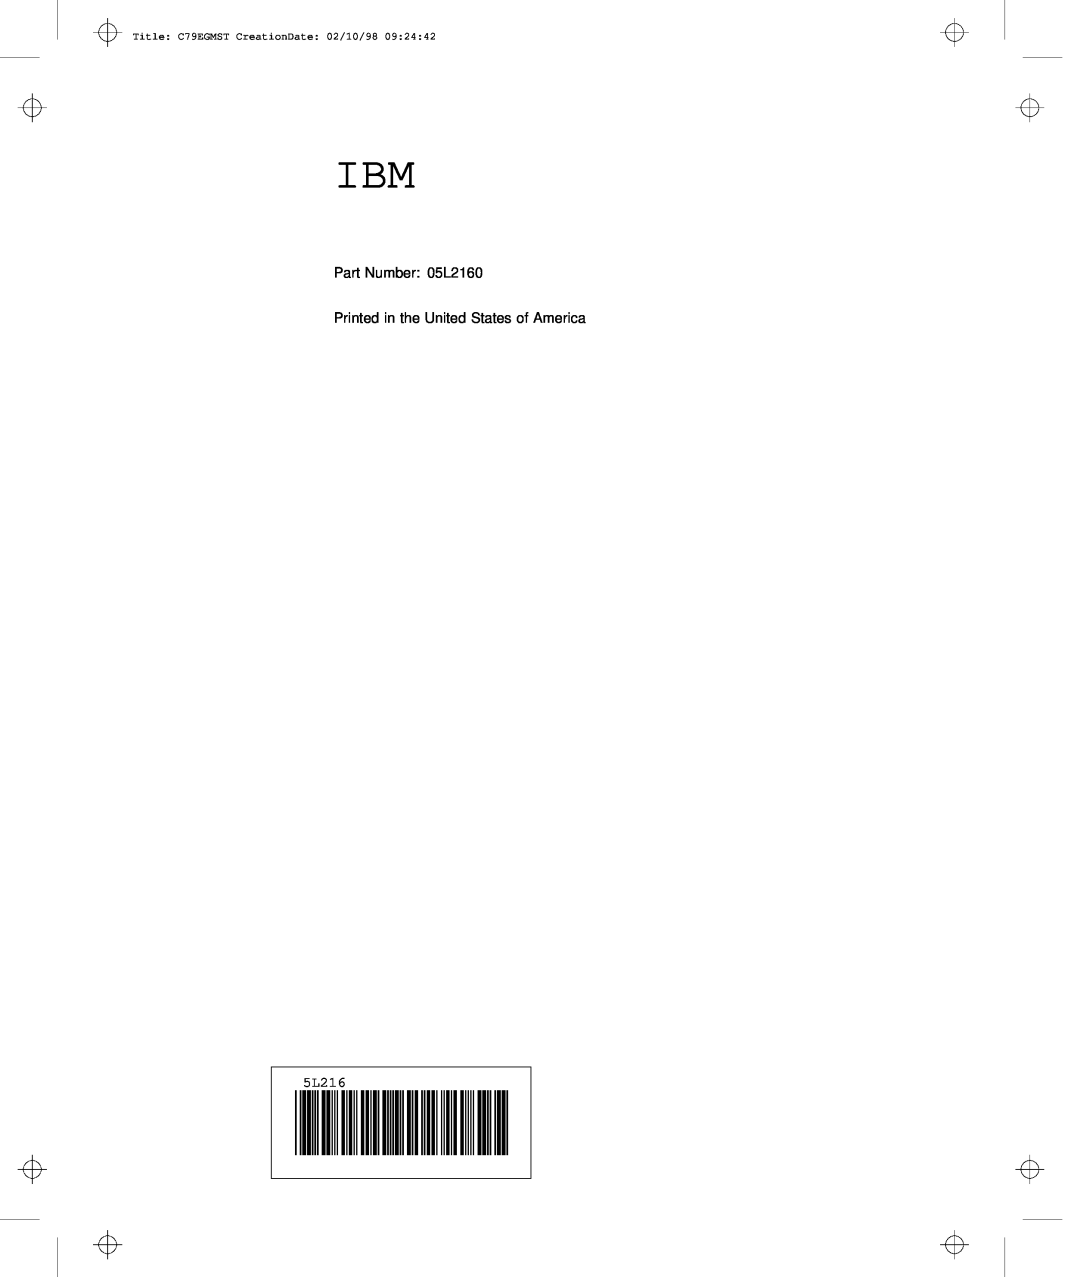 IBM manual Part Number 05L2160 Printed in the United States of America, Title C79EGMST CreationDate 02/10/98 